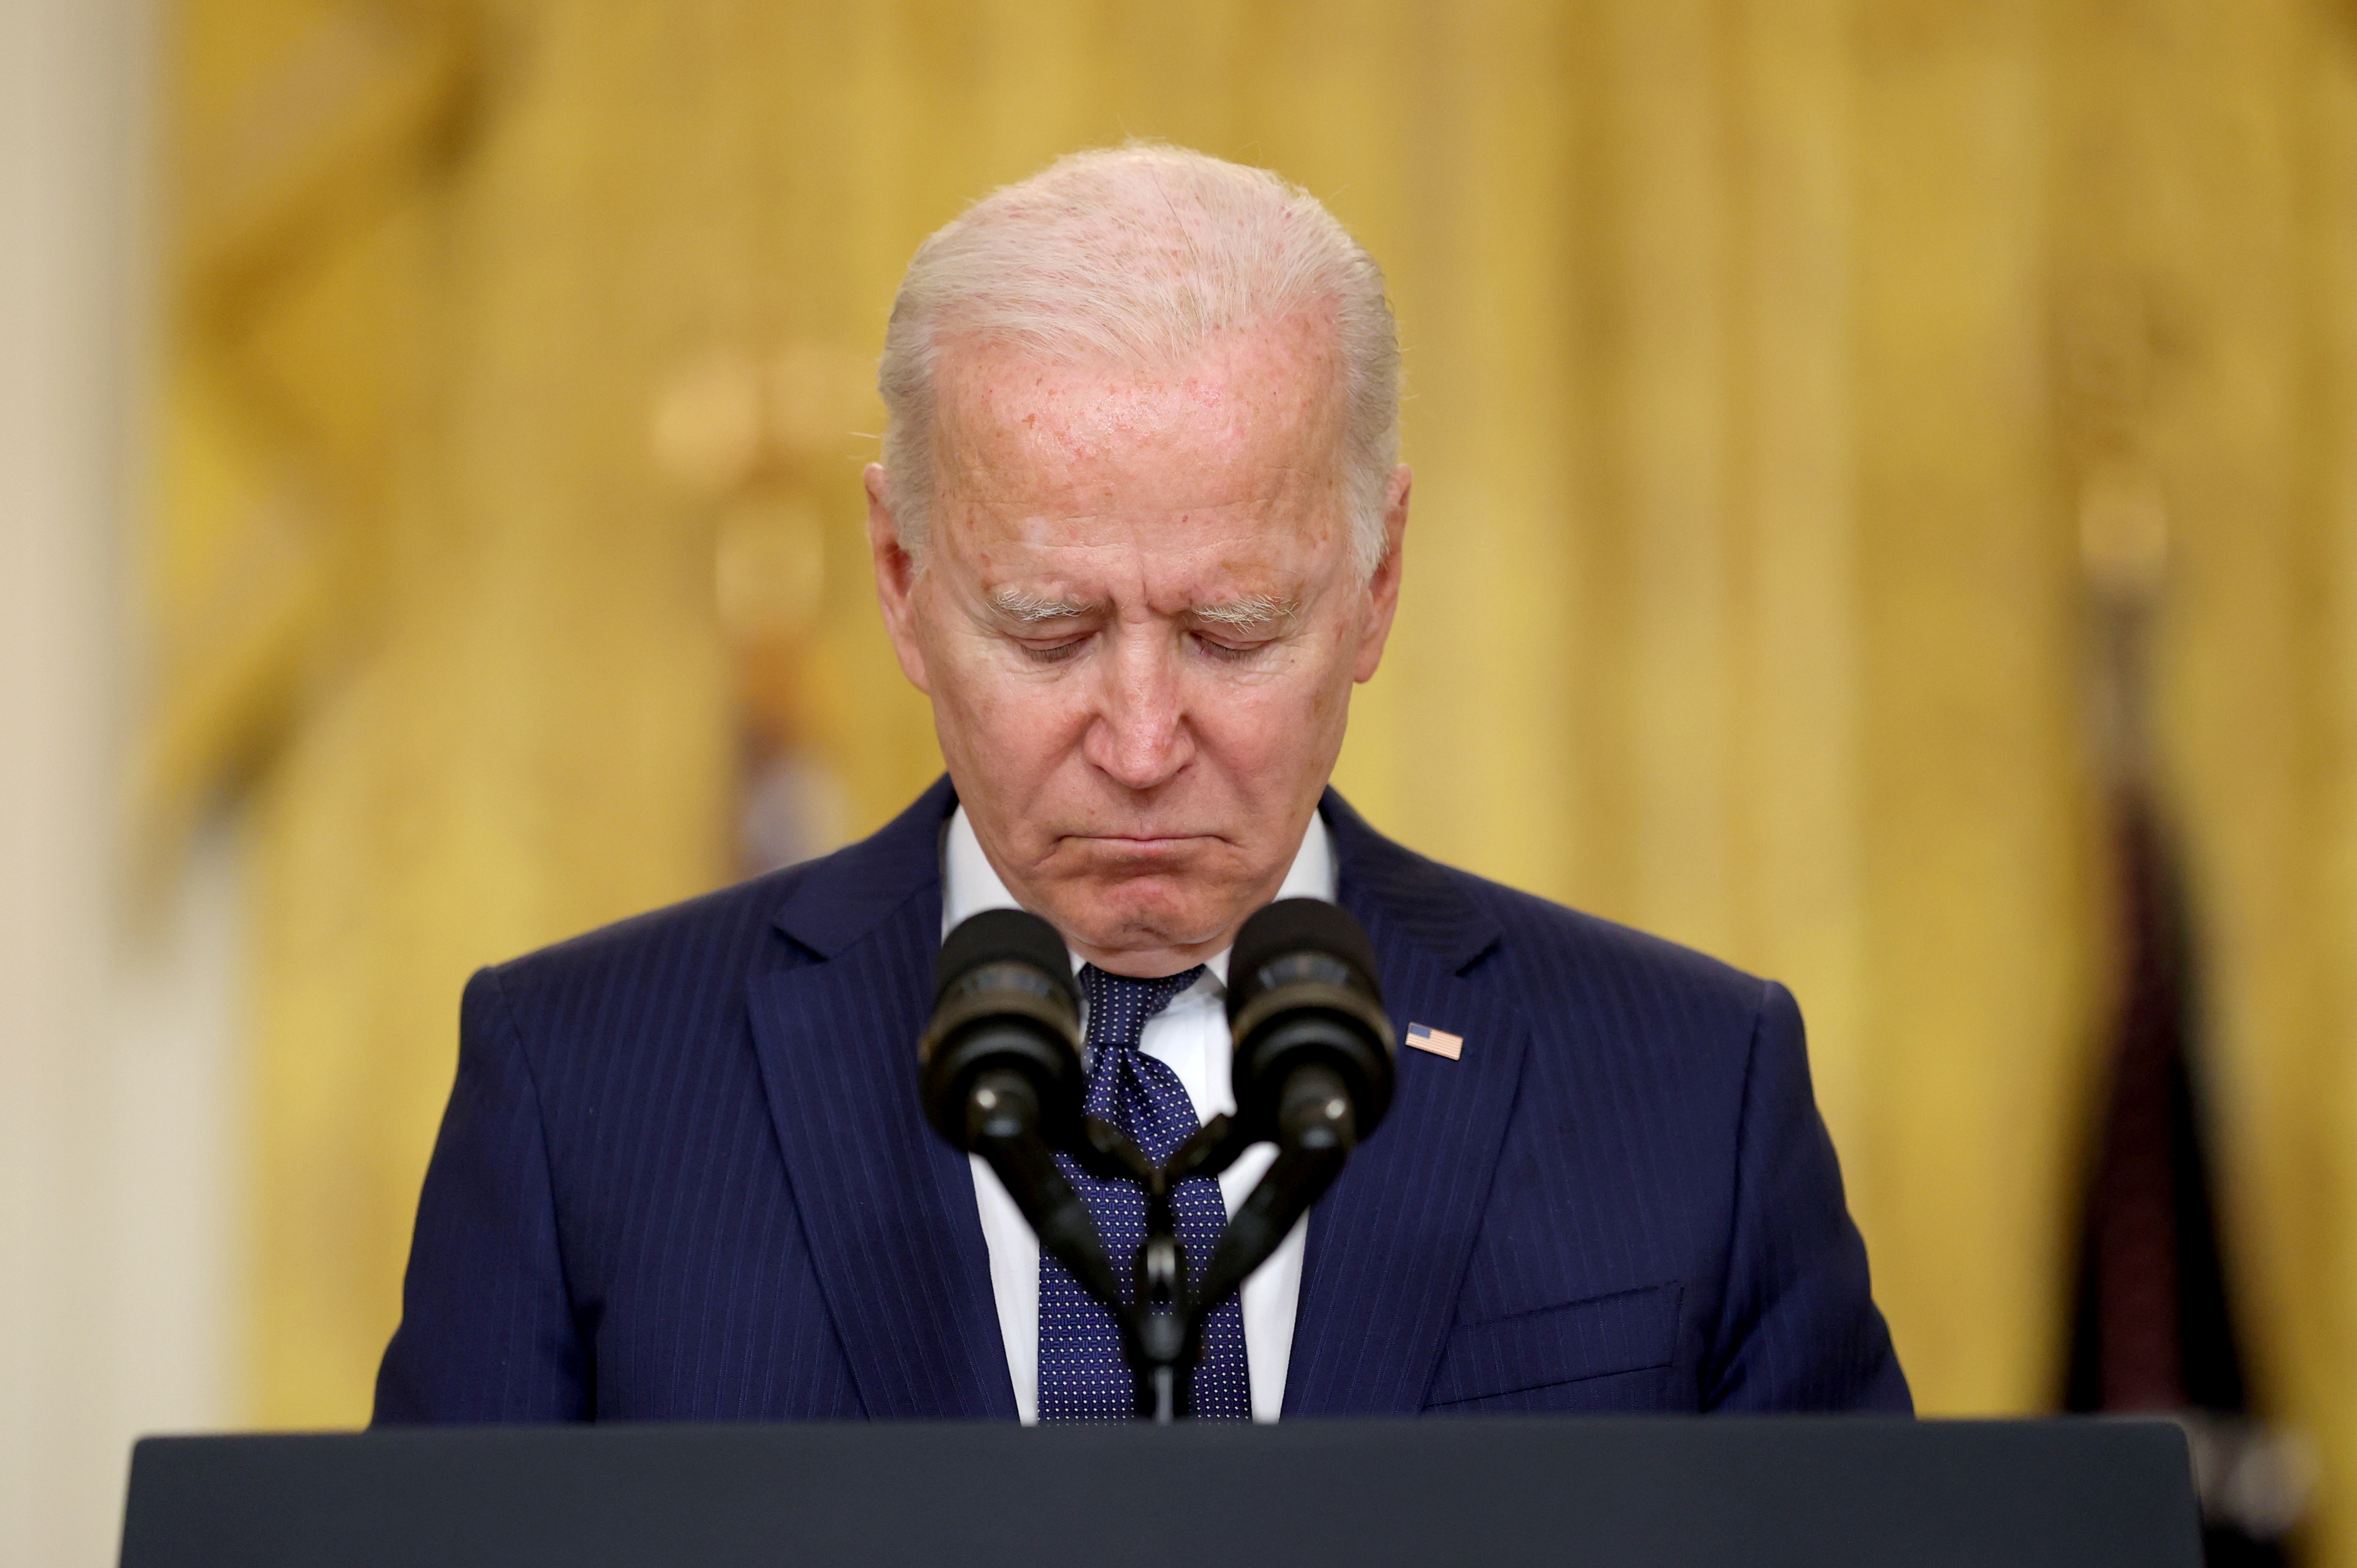 Analysis: Biden's Supreme Court losses prompt more 'shadow docket' scrutiny | Reuters